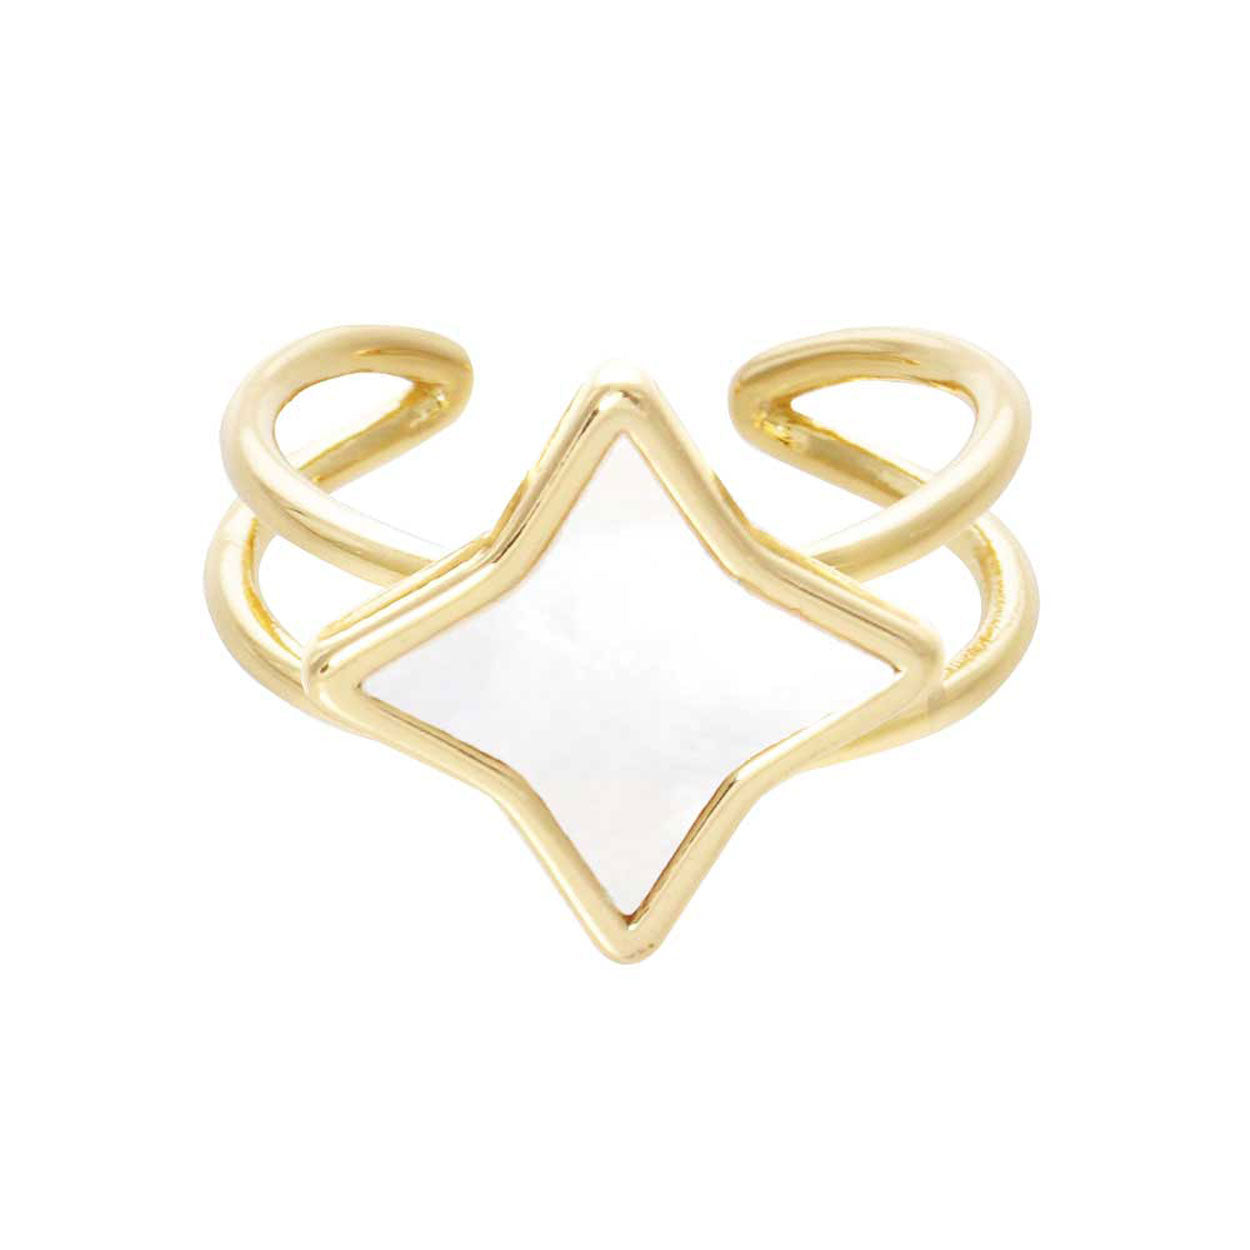 Perfect Gold Dipped Mother of Pearl Ring. put on a pop of color to complete your ensemble. Beautifully crafted design adds a gorgeous glow to any outfit. Jewelry that fits your lifestyle! Perfect Birthday Gift, Anniversary Gift, Mother's Day Gift, Anniversary Gift, Valentine's Day Gift, Graduation Gift, Prom Jewelry, Just Because Gift, Thank you Gift.